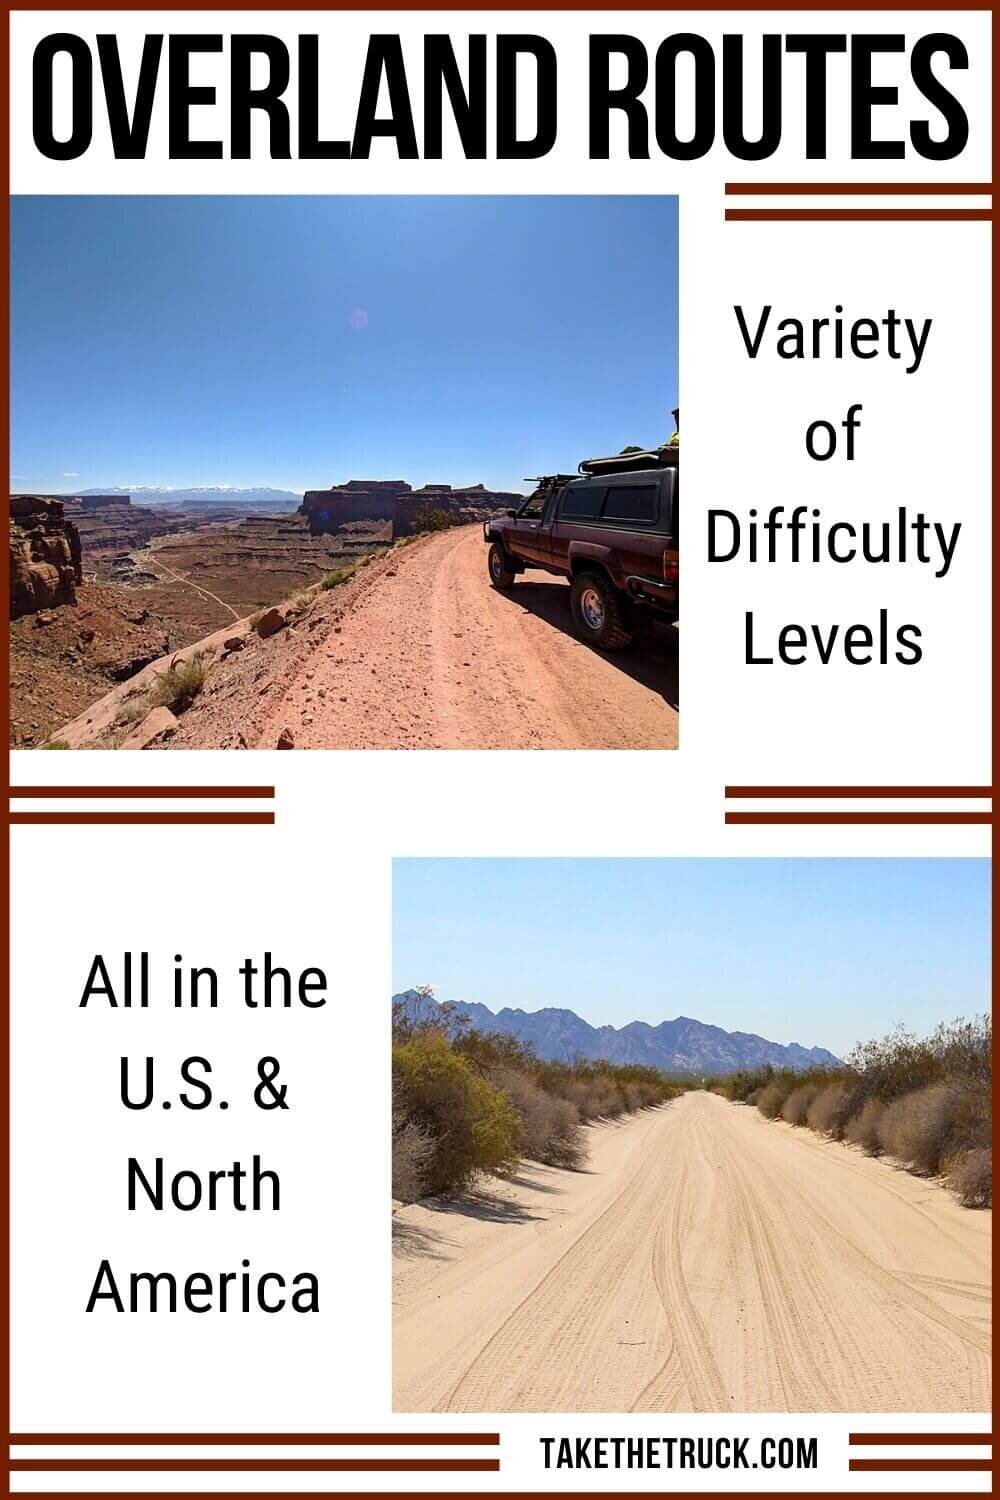 Overlanding routes and off road trails to improve your 4x4 &amp; overland travel skills! From overlanding road trips to difficult overlanding routes &amp; off road trails, there’s something for you!